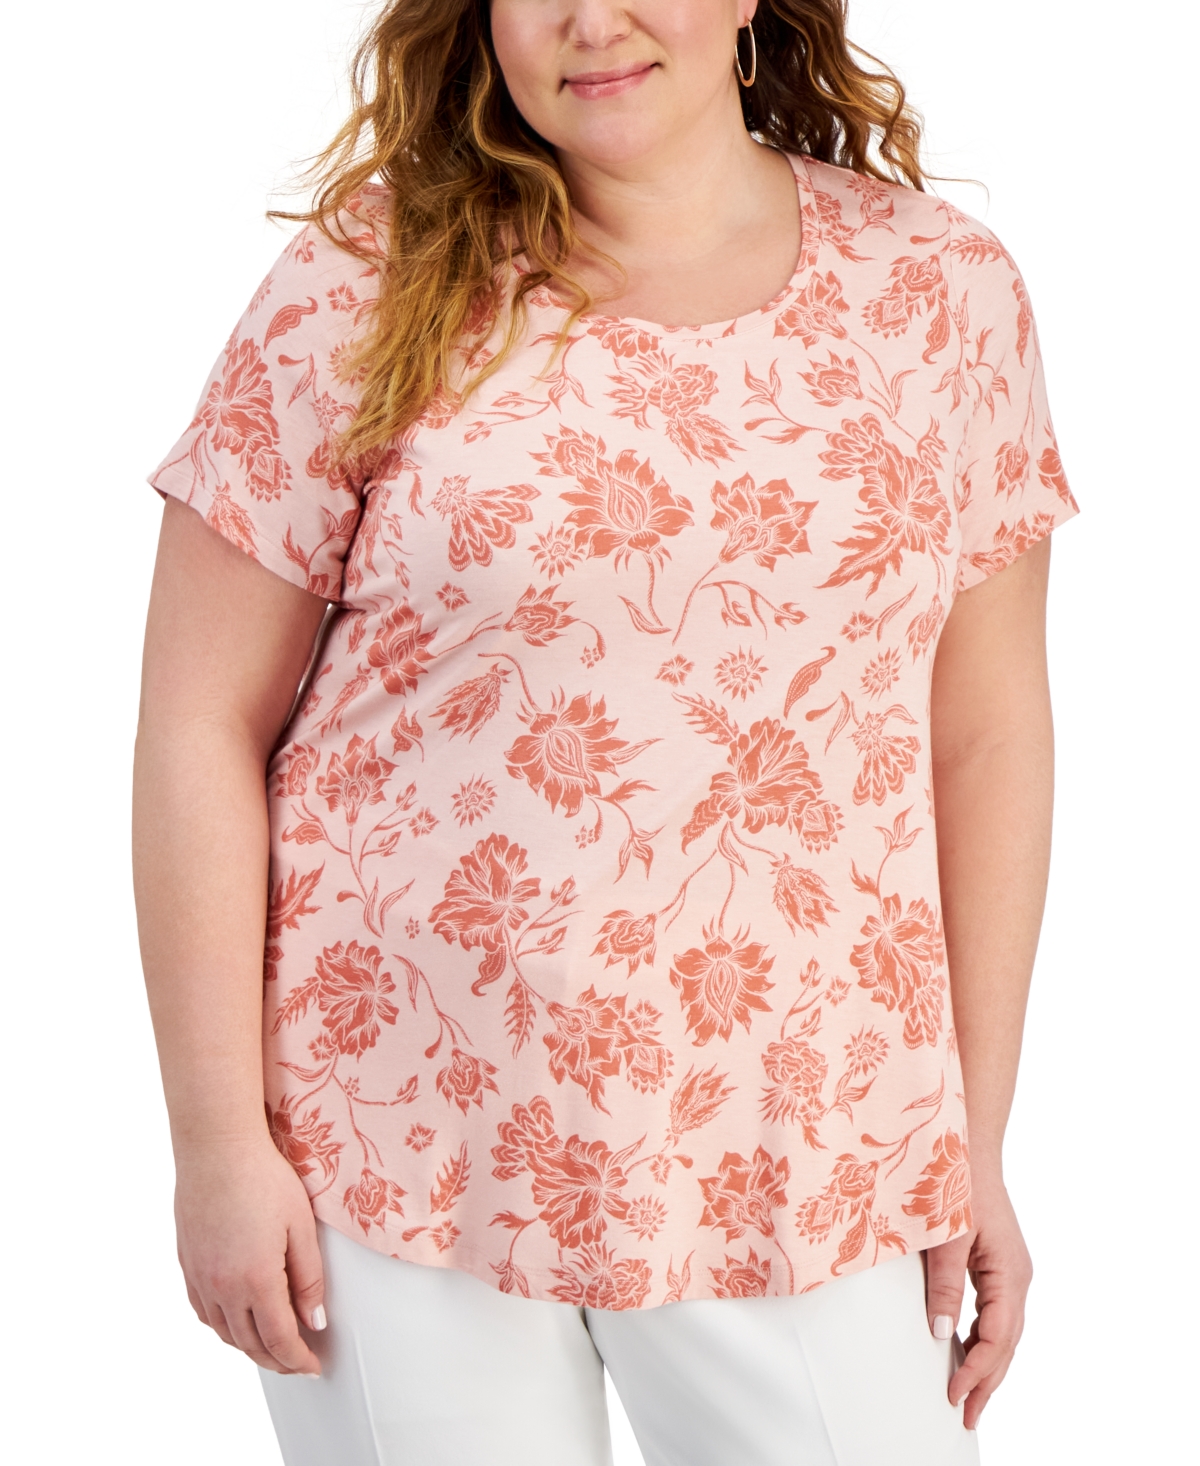 Plus Size Floral Print Short-Sleeve Top, Created for Macy's - Rose Tint Combo